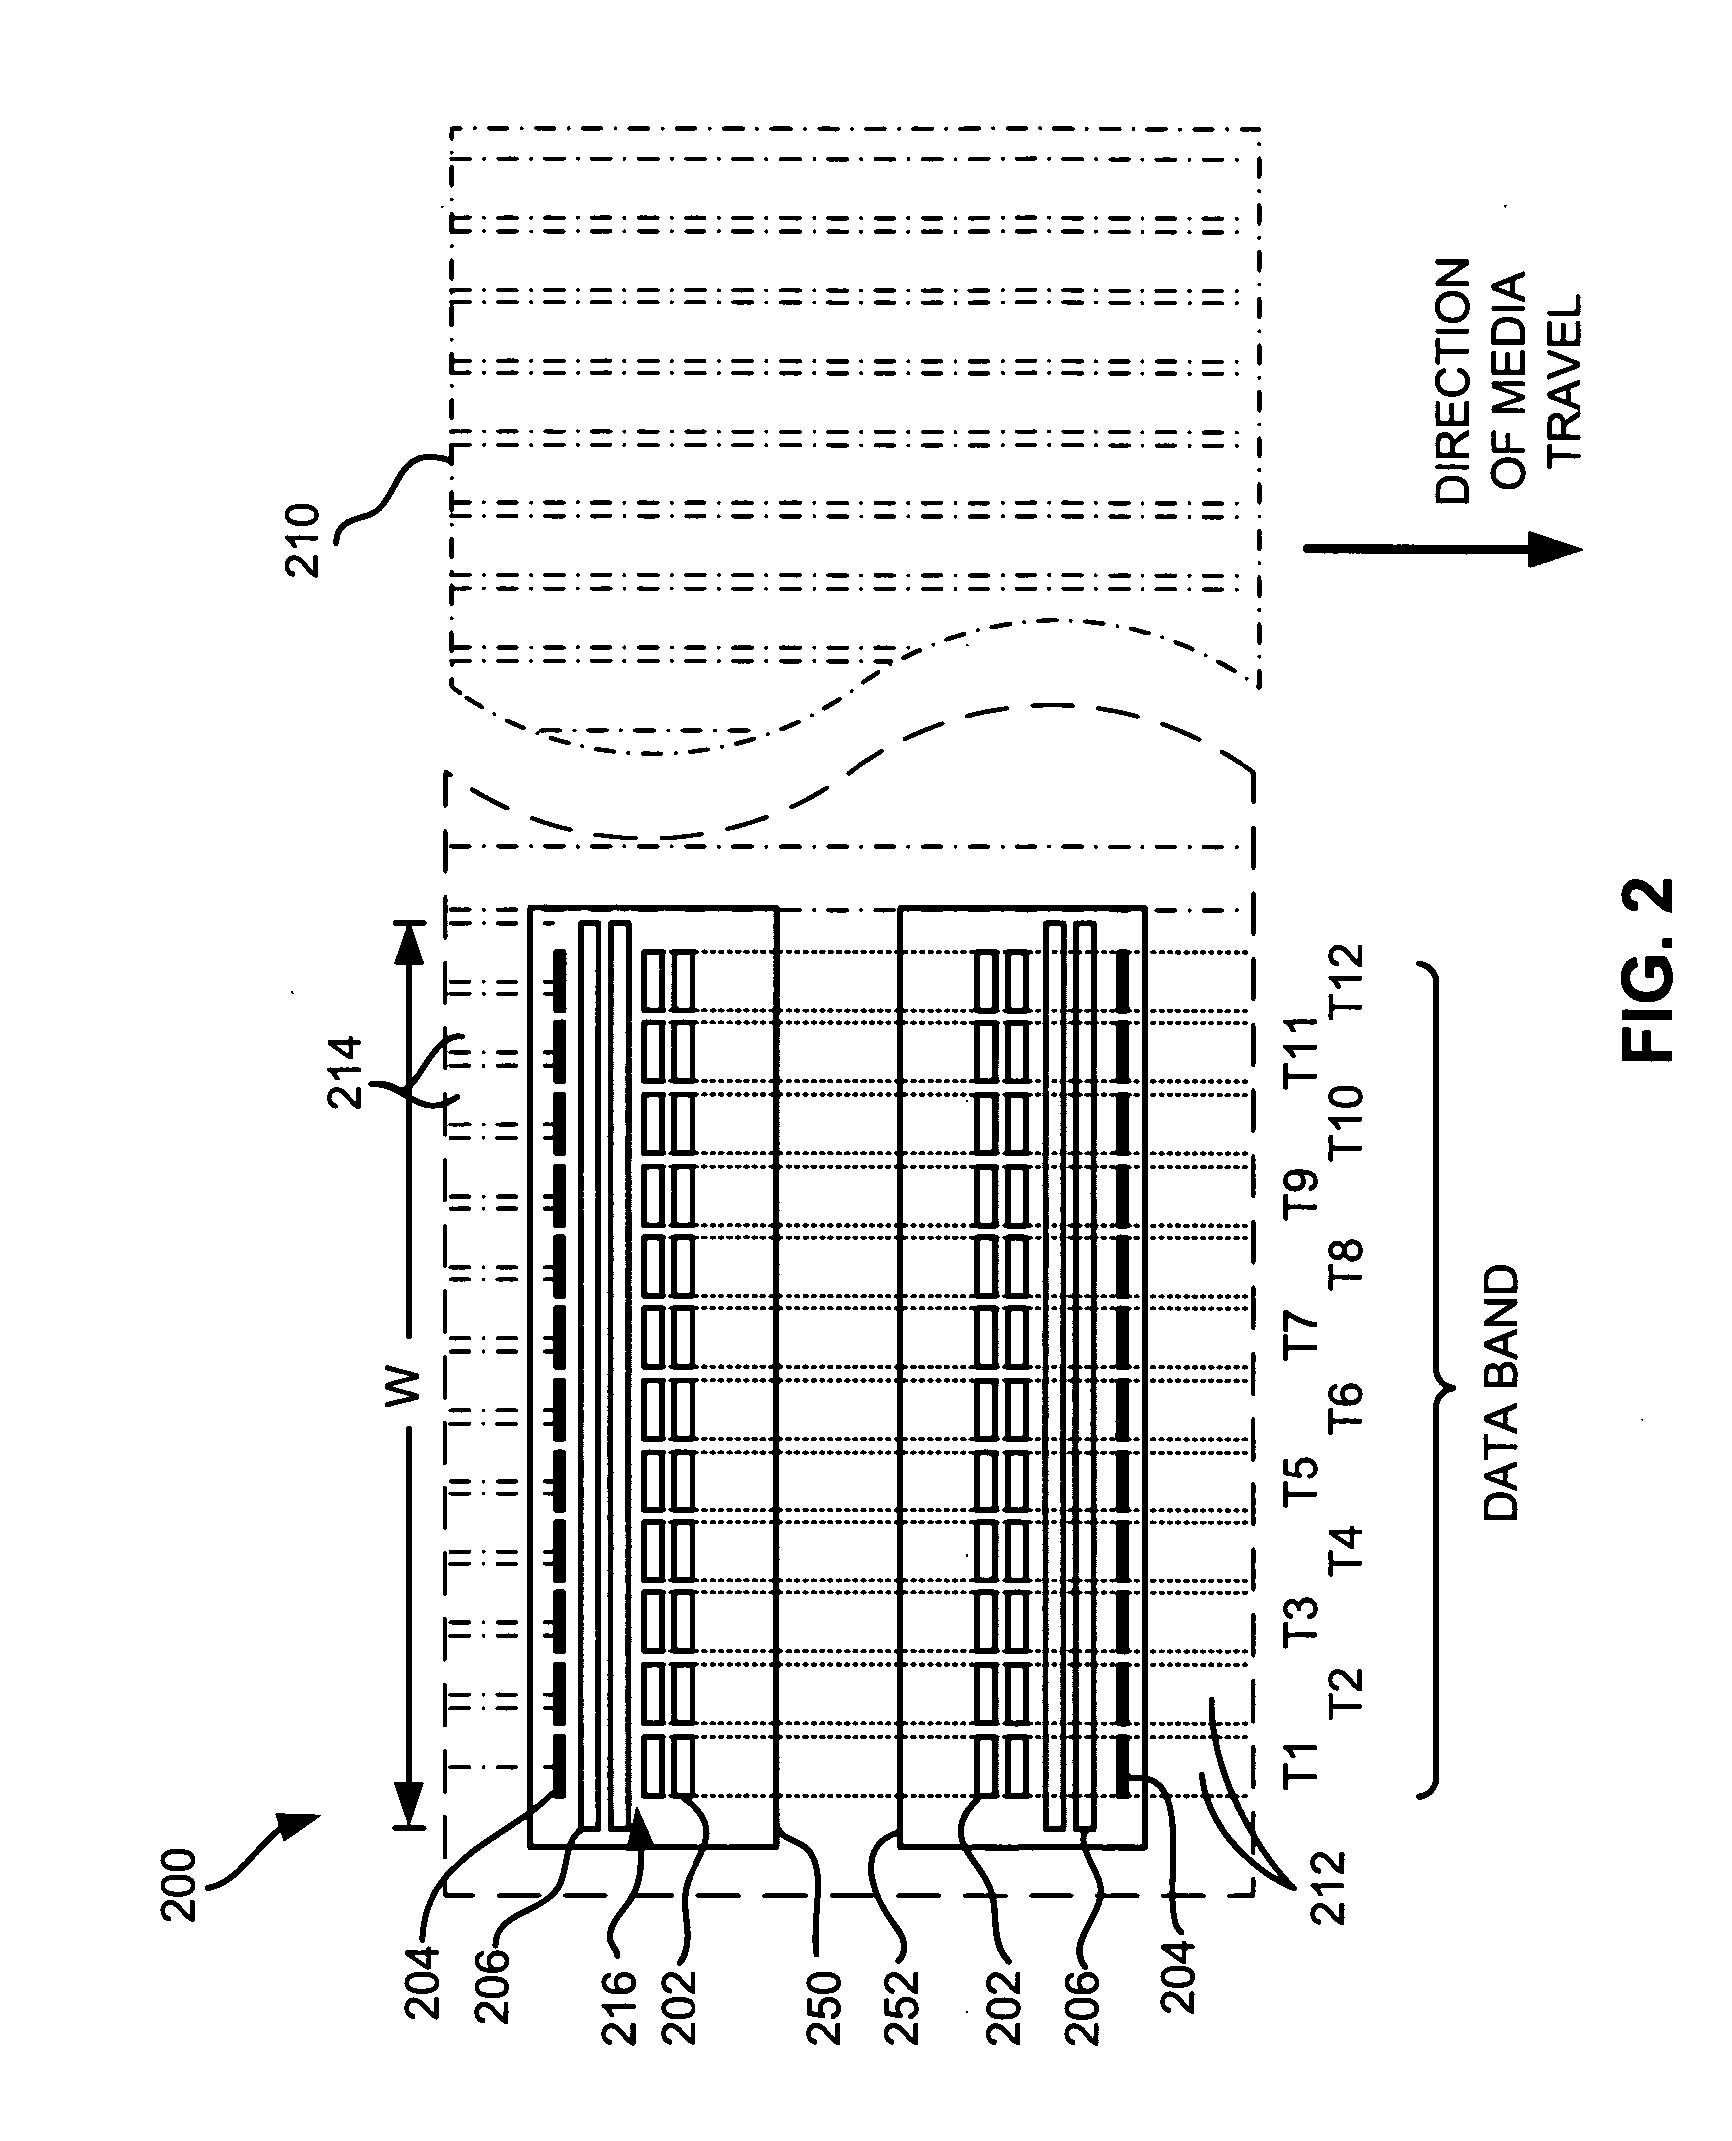 Tape head having write devices and narrower read devices